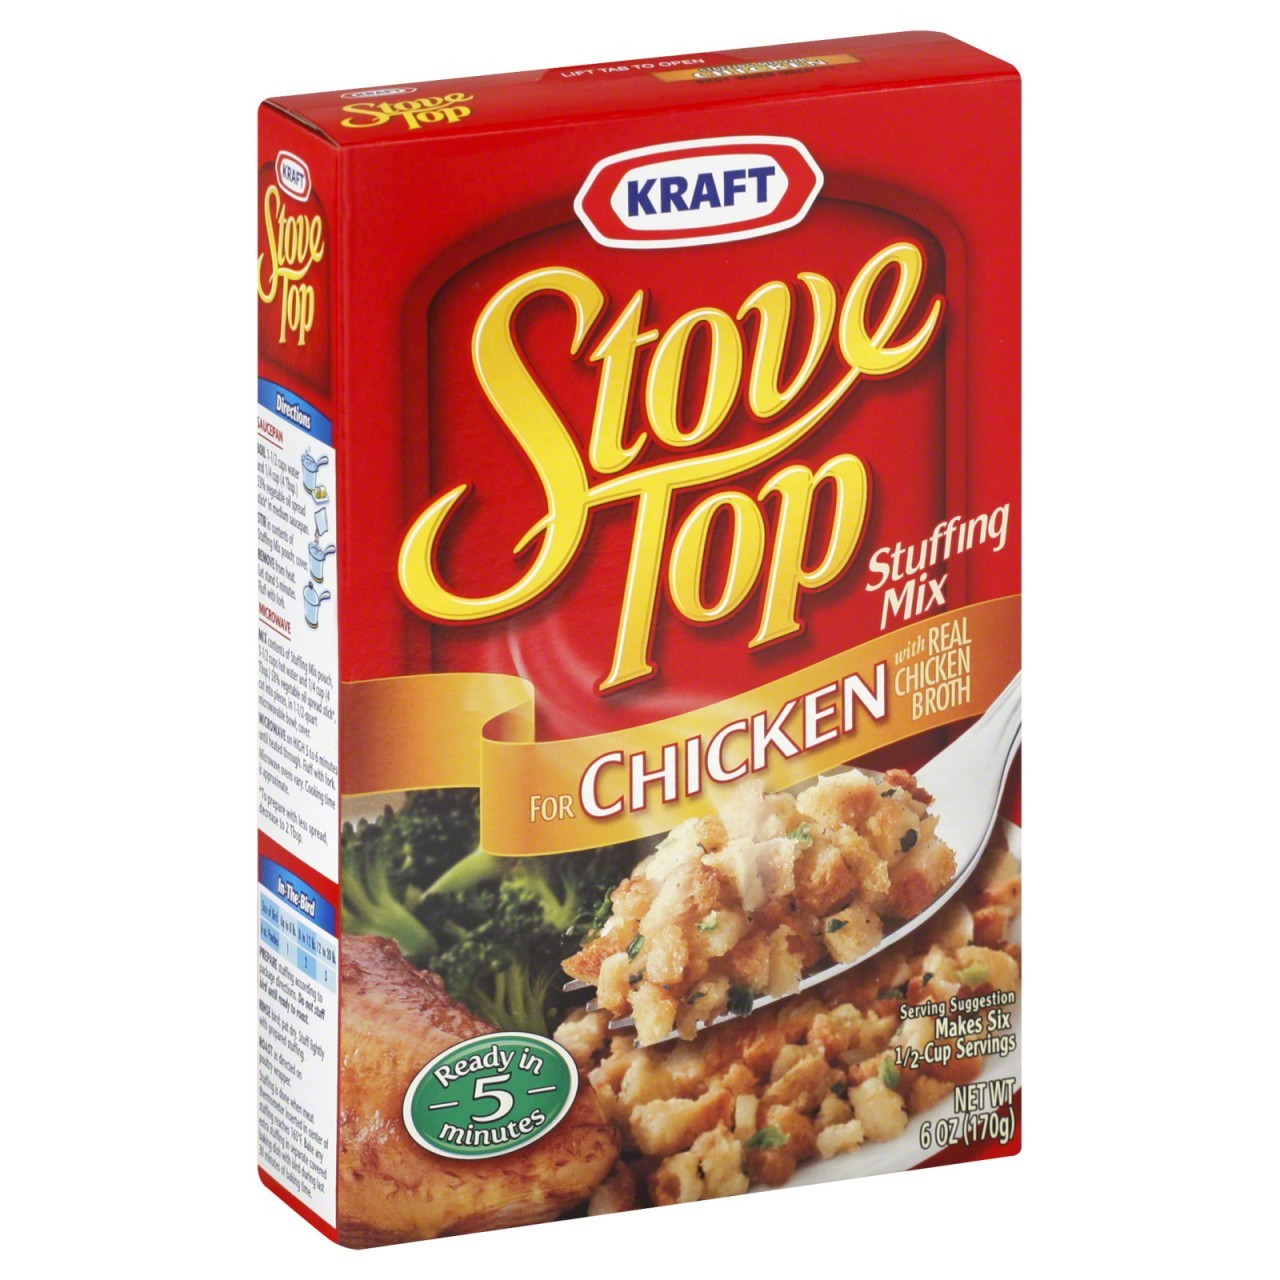 STOVE TOP STUFFING MIX CHICKEN 6oz